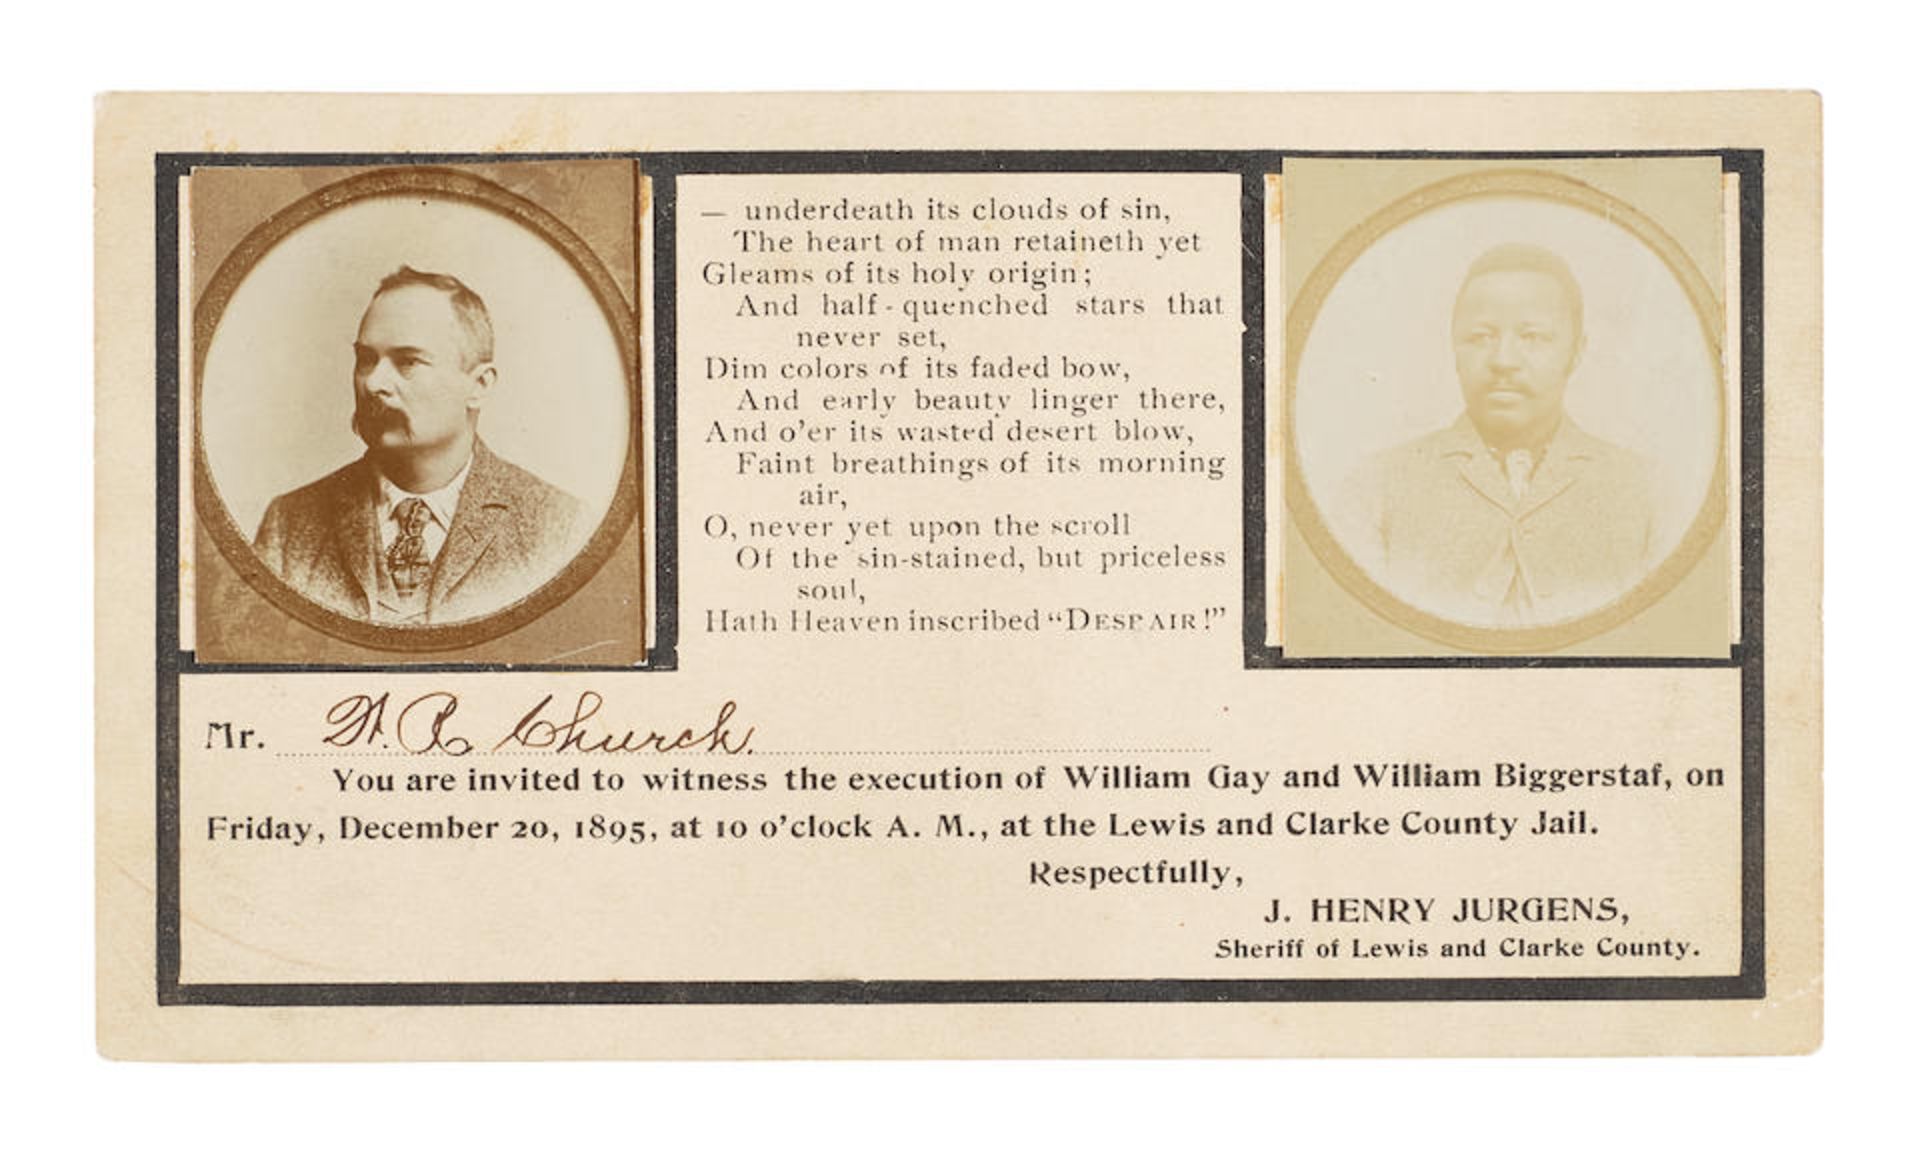 MONTANA HANGING. Invitation to the double execution of William Gay and William Biggerstaf, Lewi...